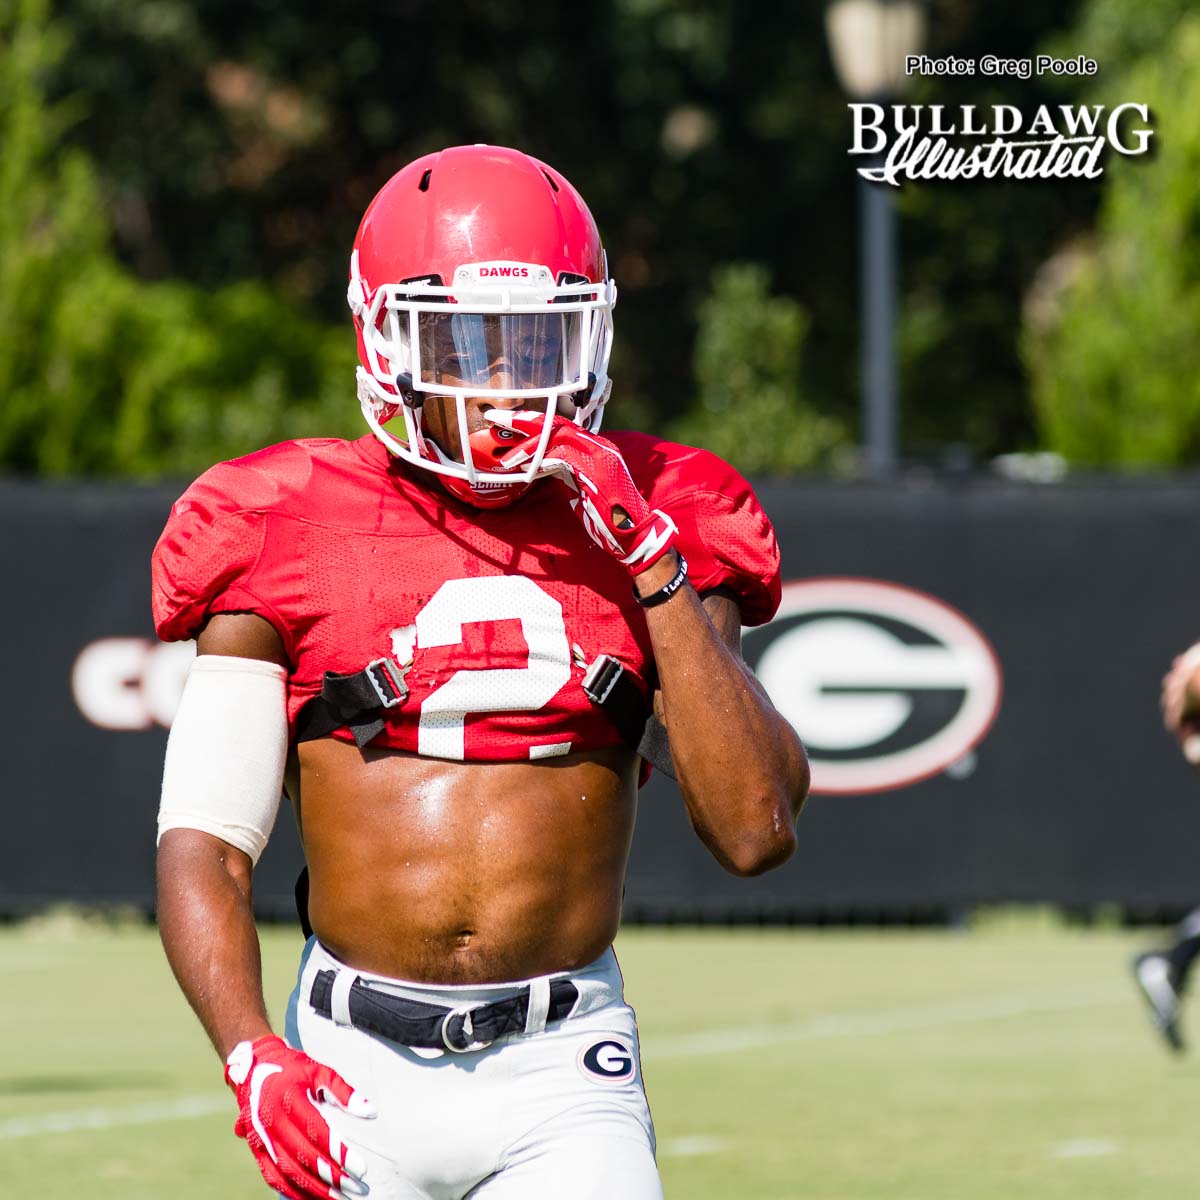 Junior wide out Jayson Stanley makes the grab in Wednesday's practice - UGA Fall Camp - Practice No. 21 - Wednesday, Aug. 23, 2017